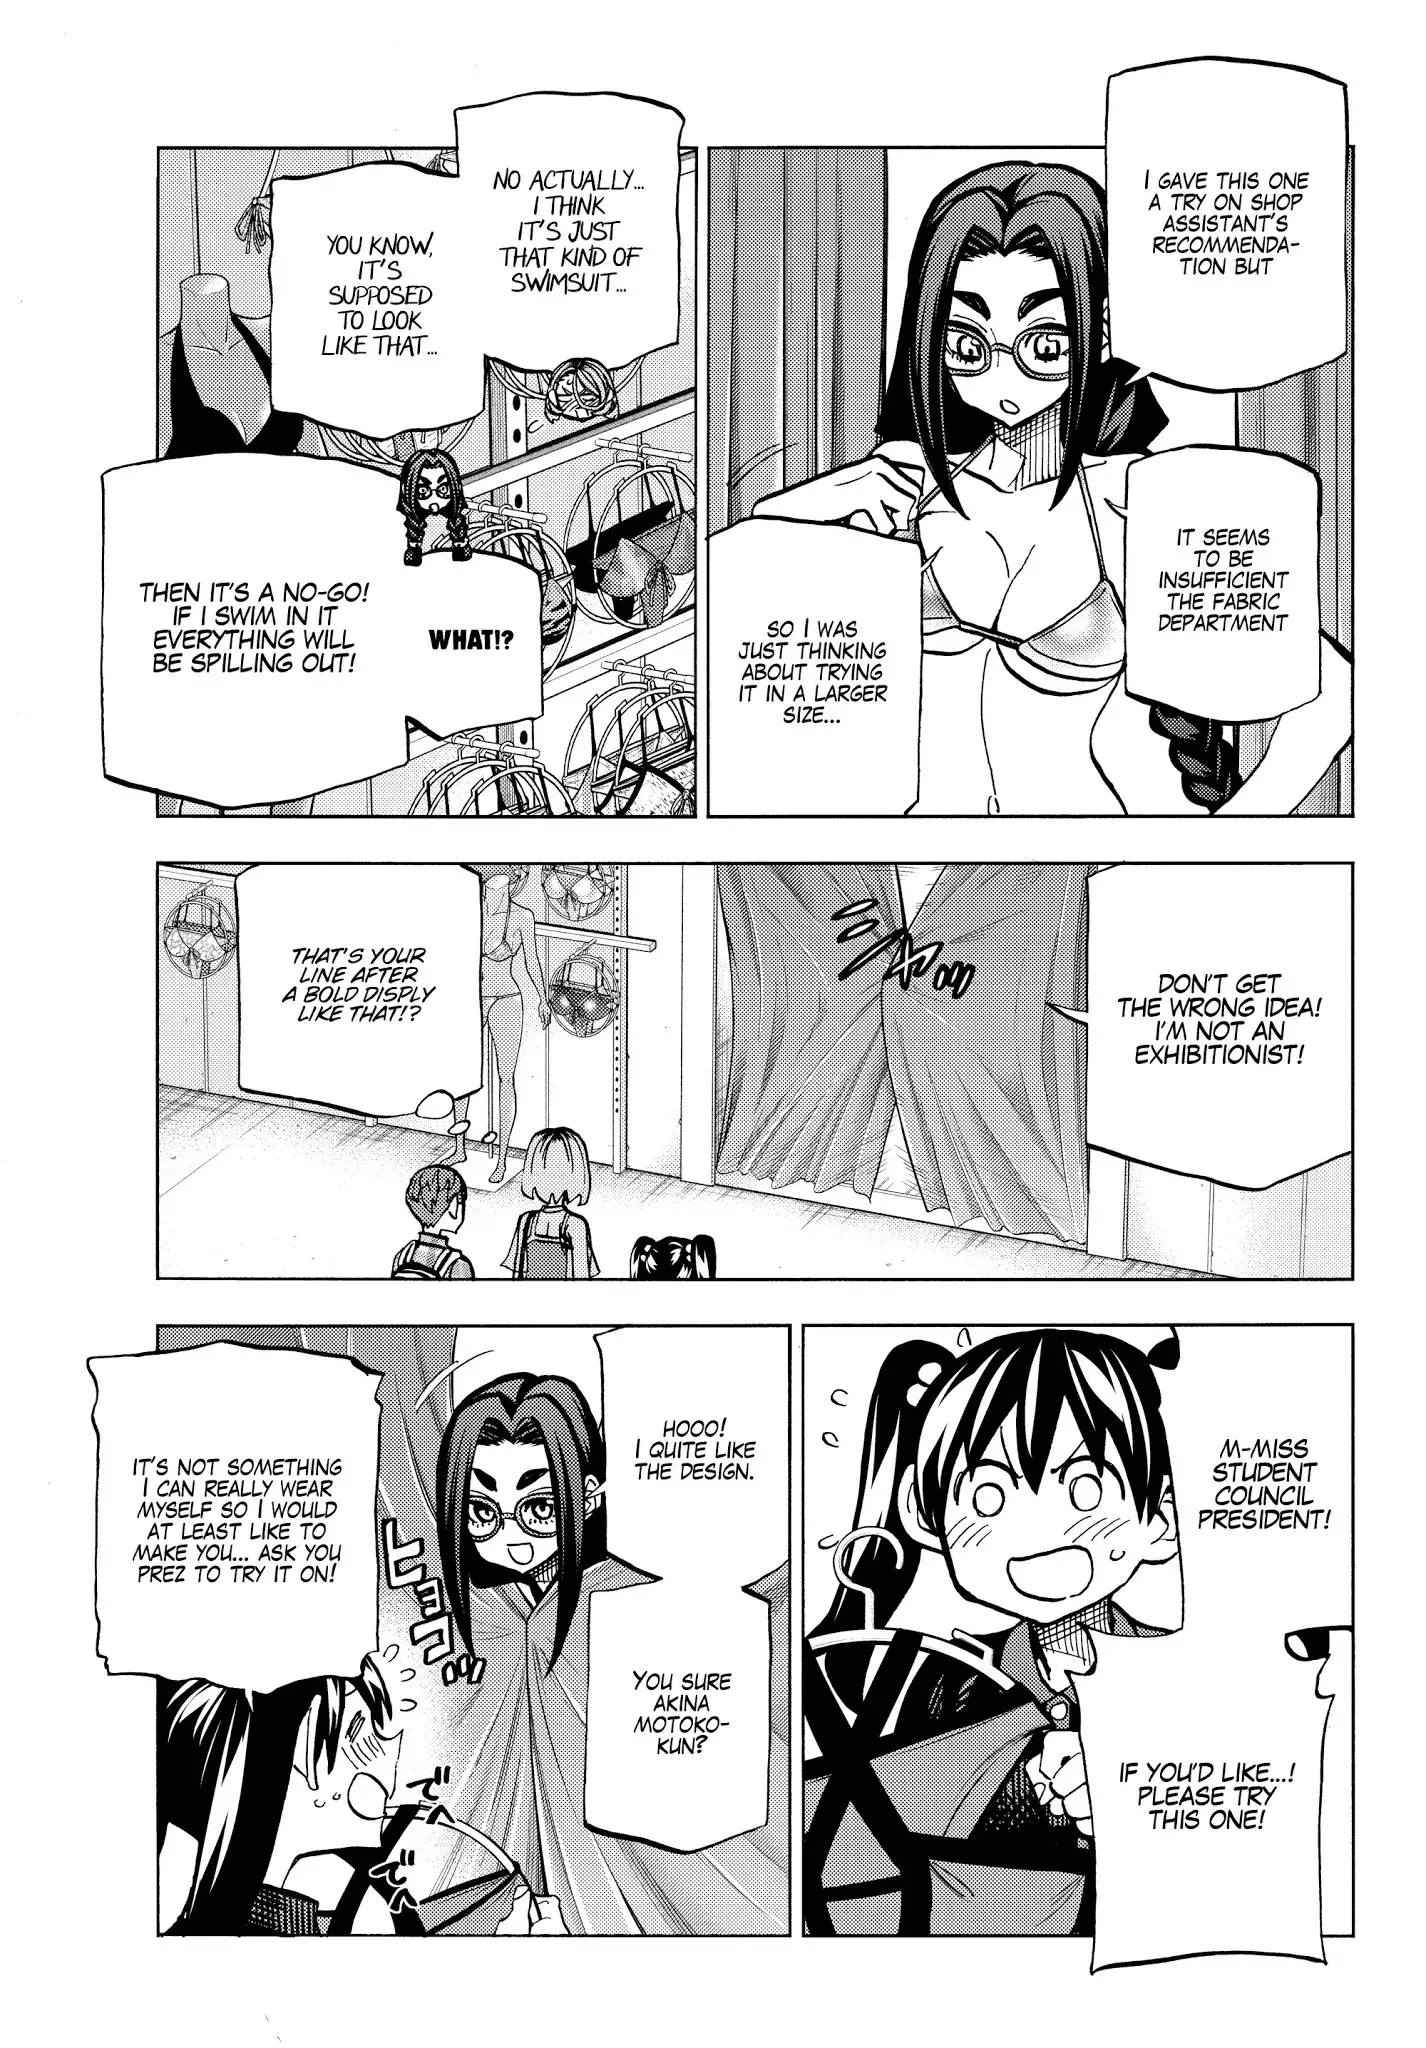 The Story Between A Dumb Prefect And A High School Girl With An Inappropriate Skirt Length - 17 page 12